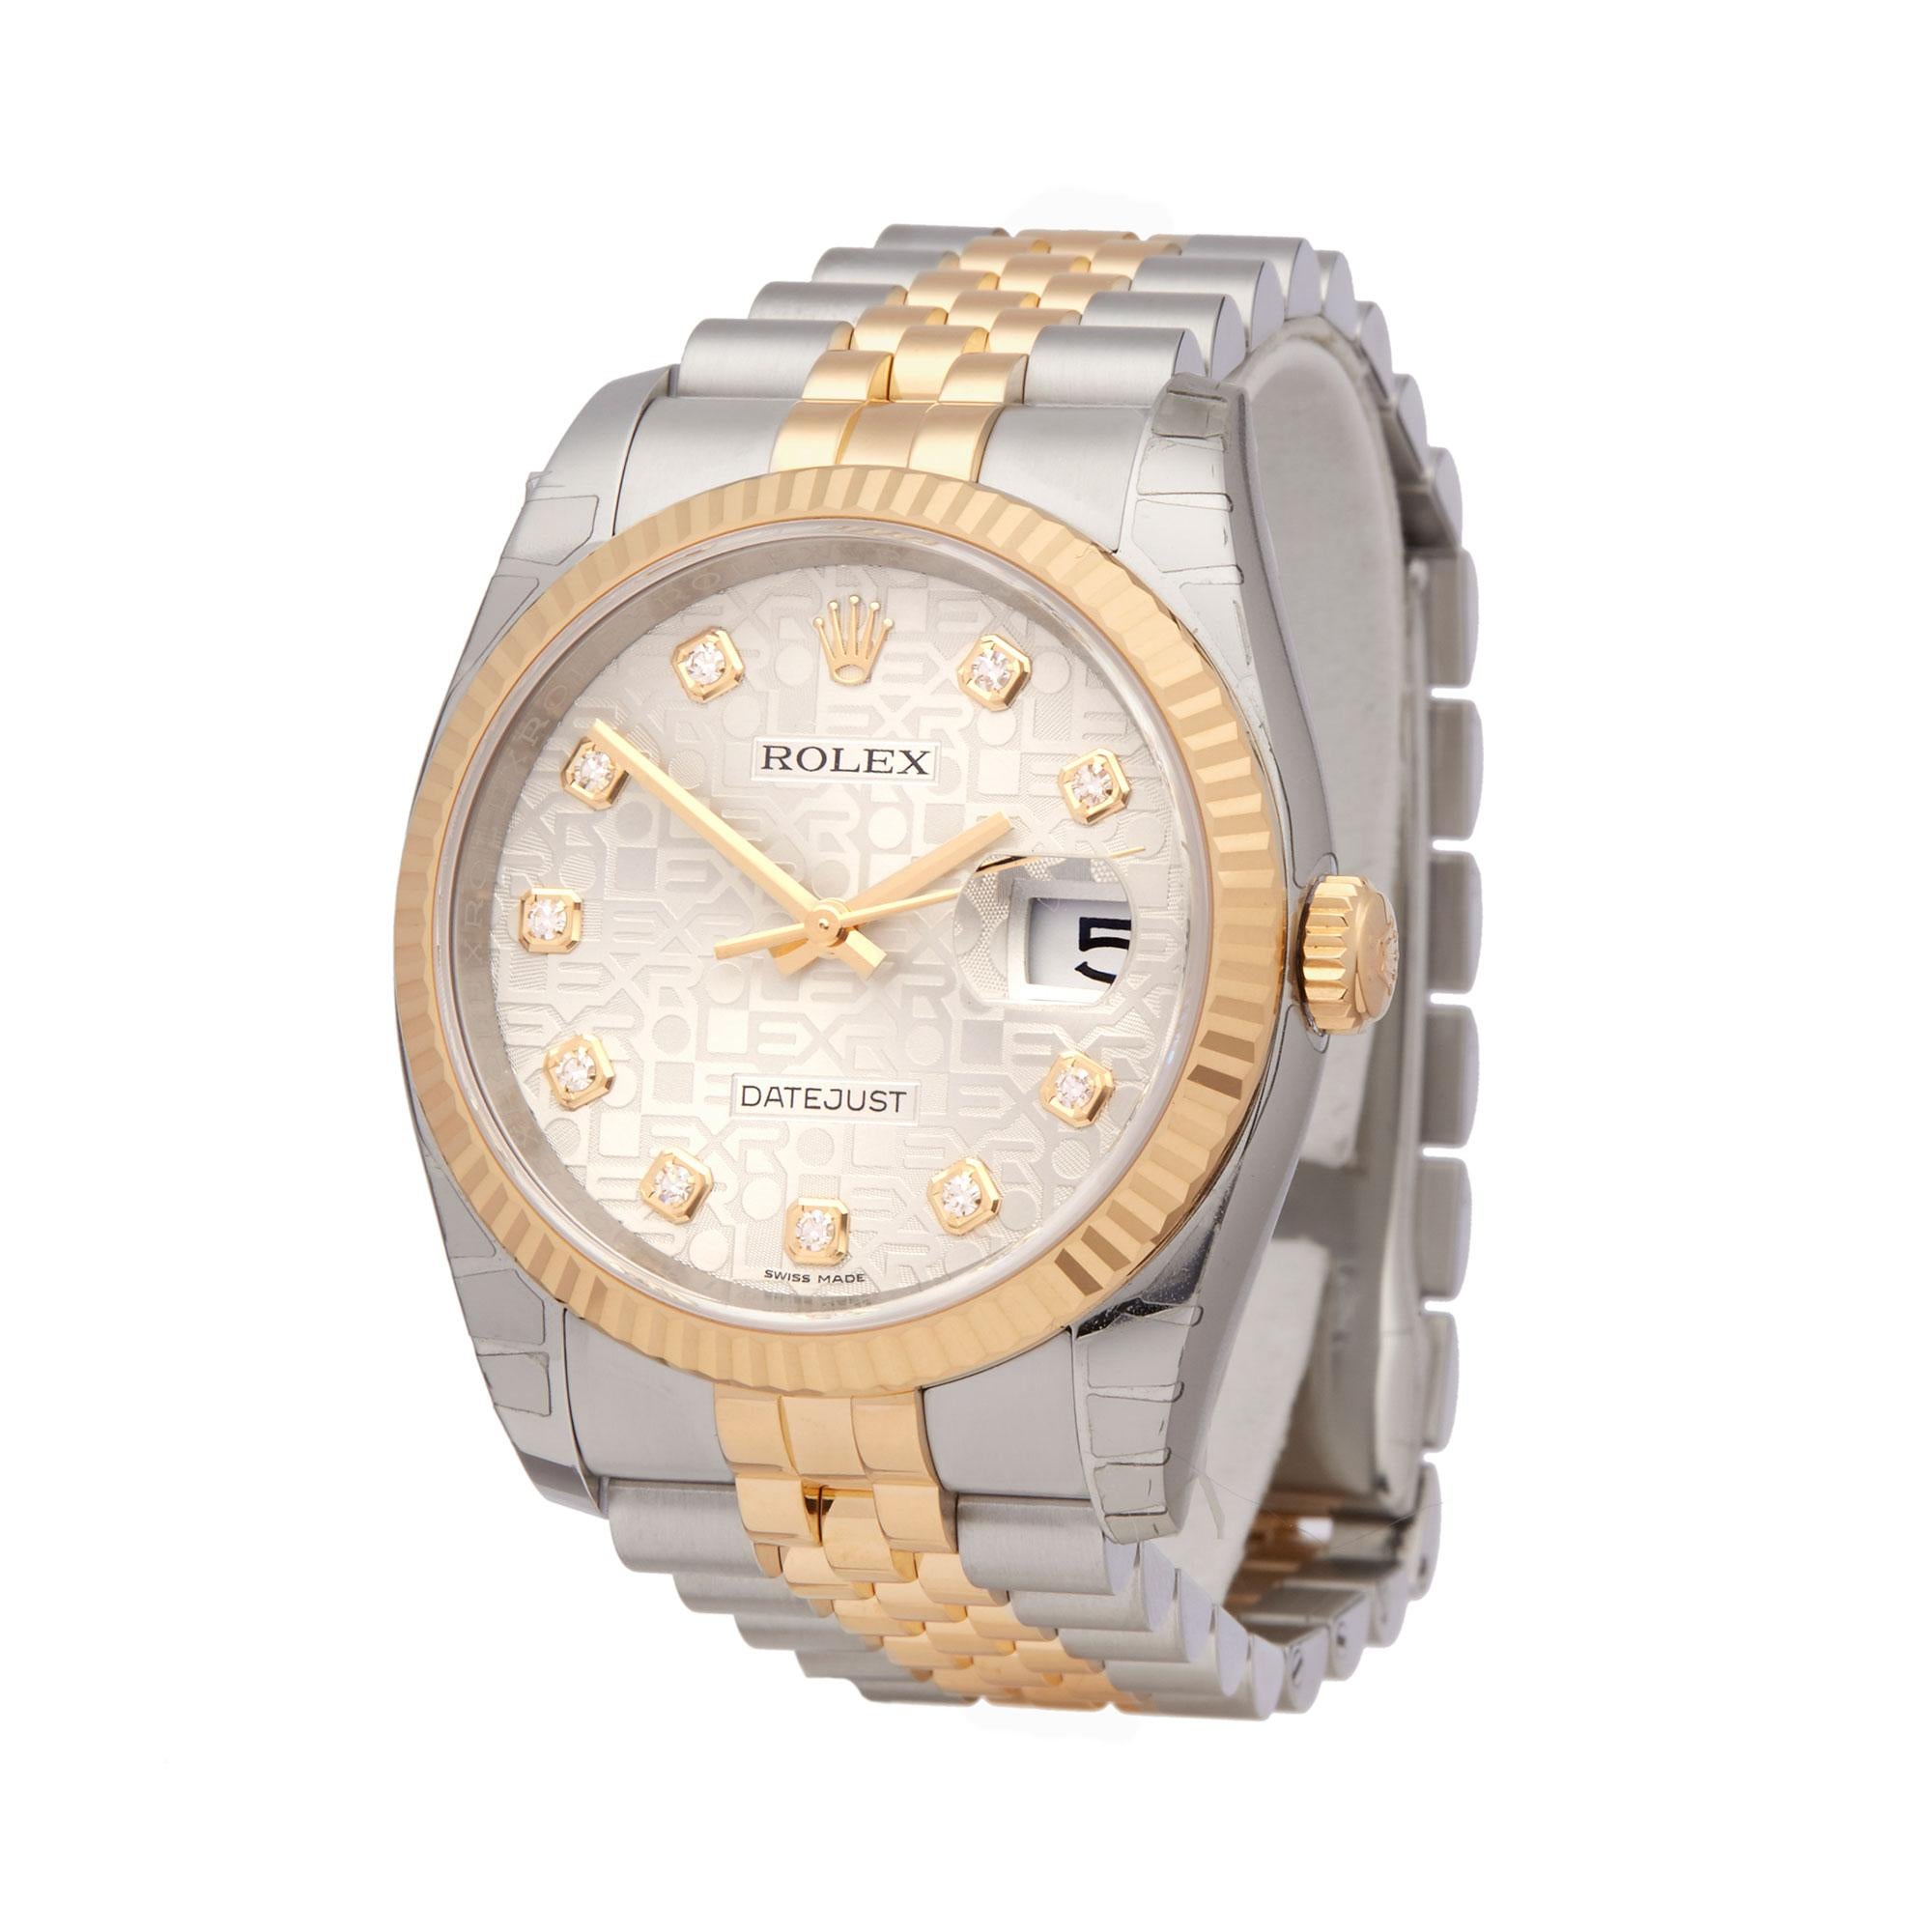 Reference: W5724
Manufacturer: Rolex
Model: Datejust
Model Reference: 116233
Age: 7th September 2016
Gender: Unisex
Box and Papers: Box and Guarantee
Dial: Silver Diamonds
Glass: Sapphire Crystal
Movement: Automatic
Water Resistance: To